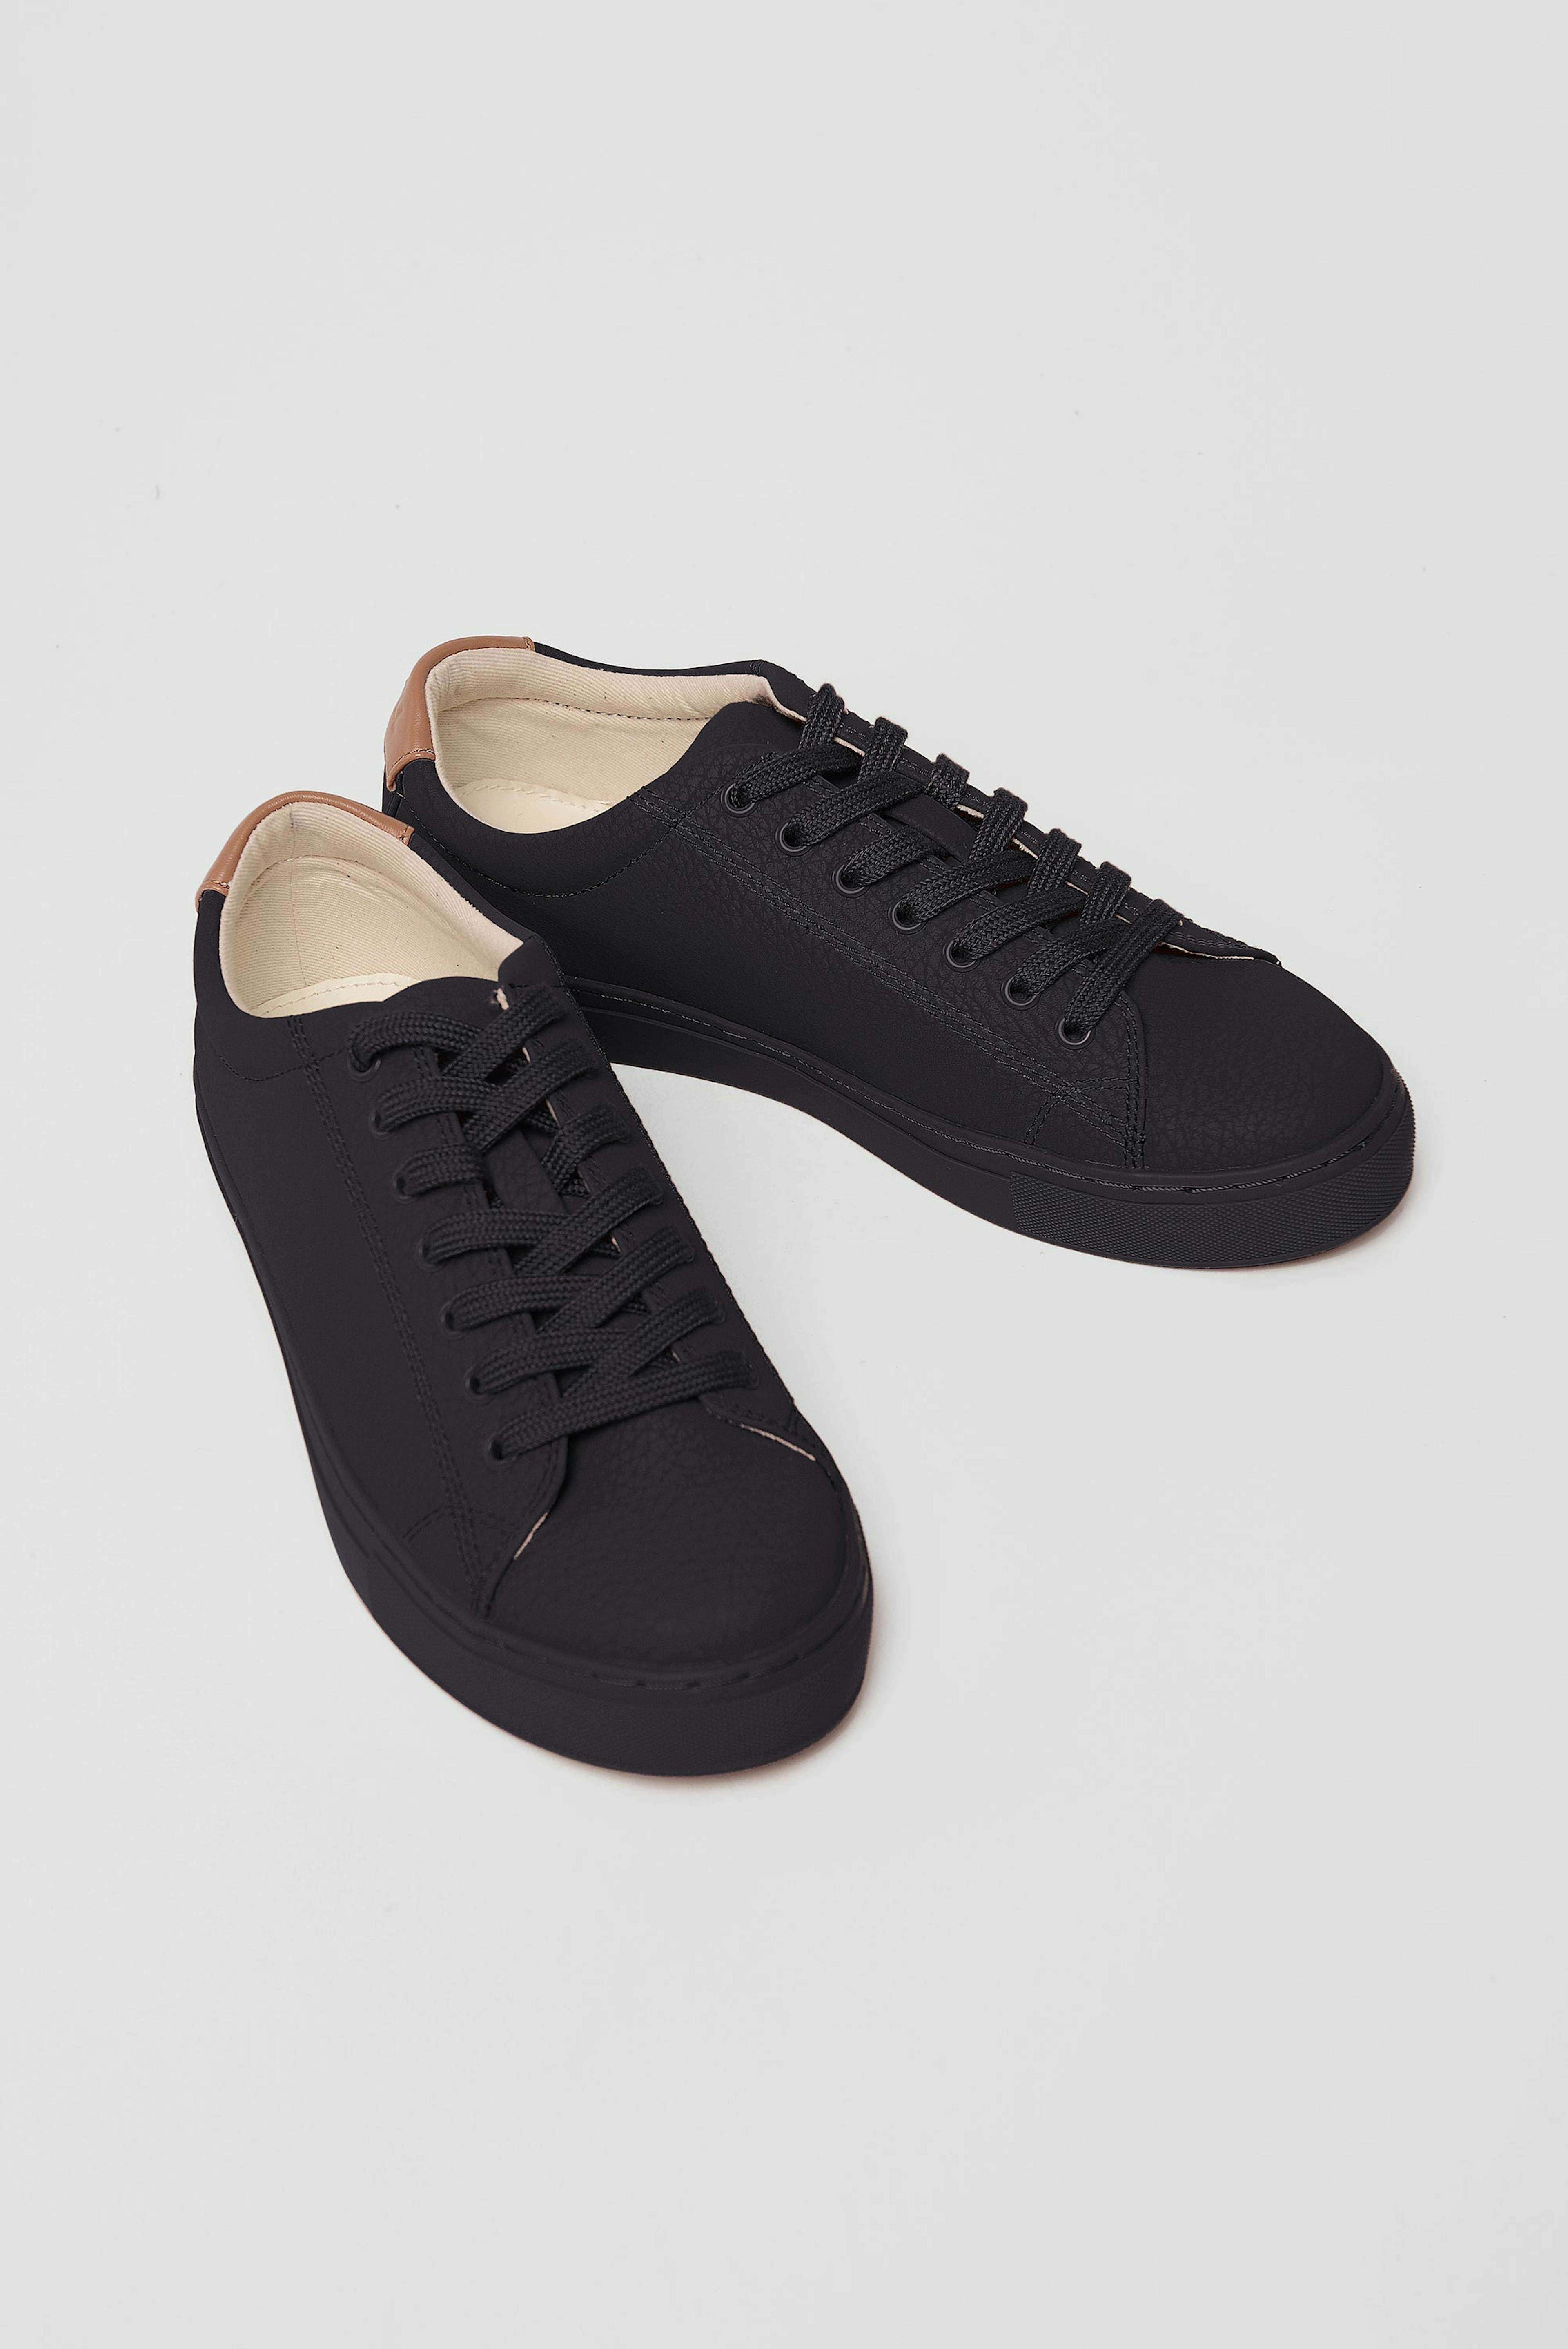 R-Kind | Certified Organic & Recycled Flat Trainer | Mercury Black Grained